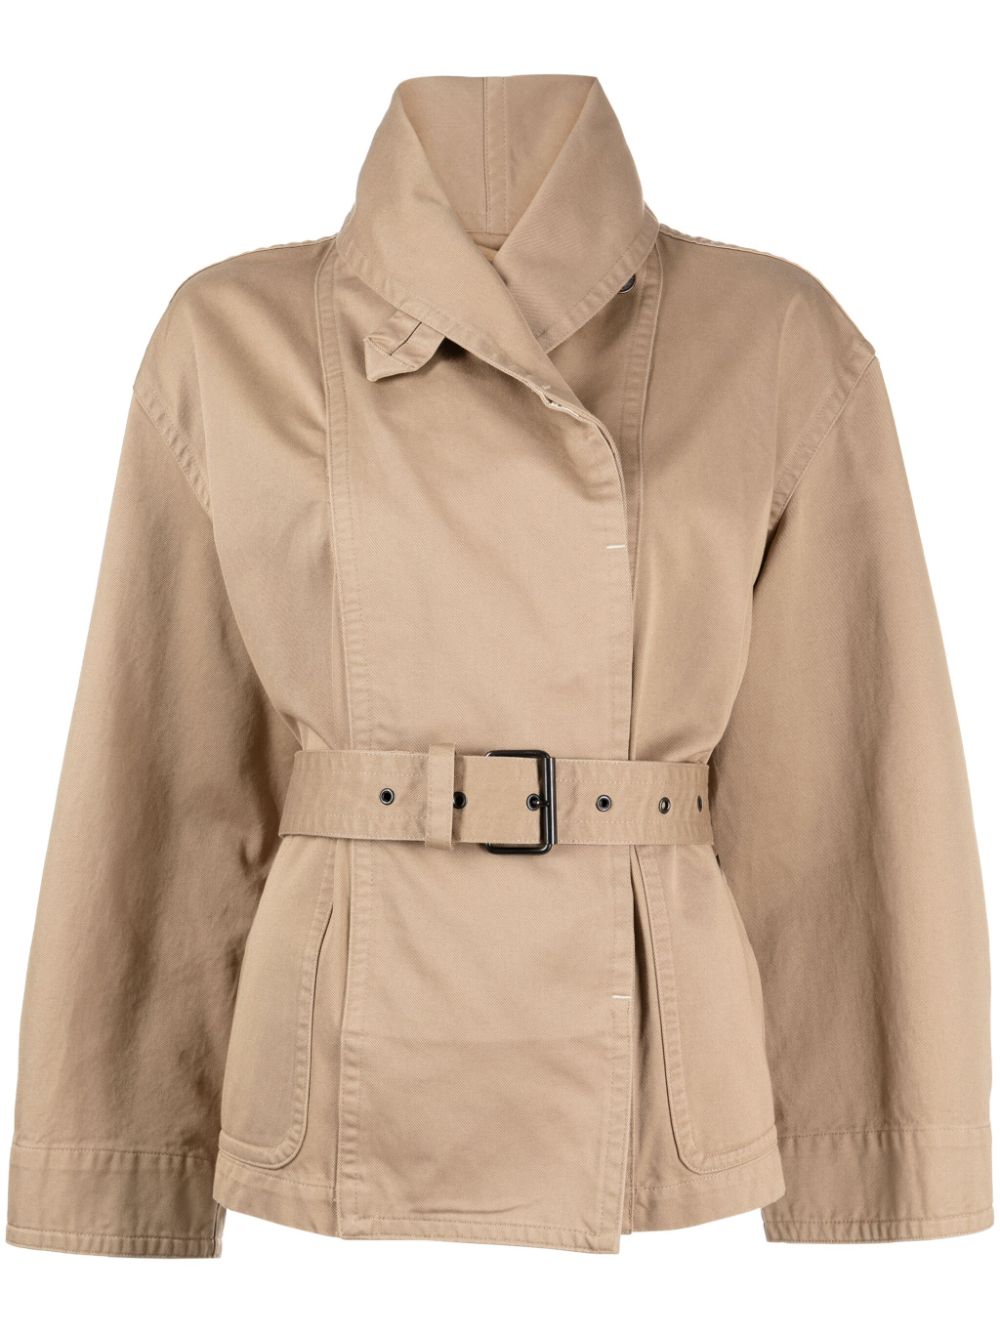 Image 1 of MARANT ÉTOILE Prunille belted cotton jacket